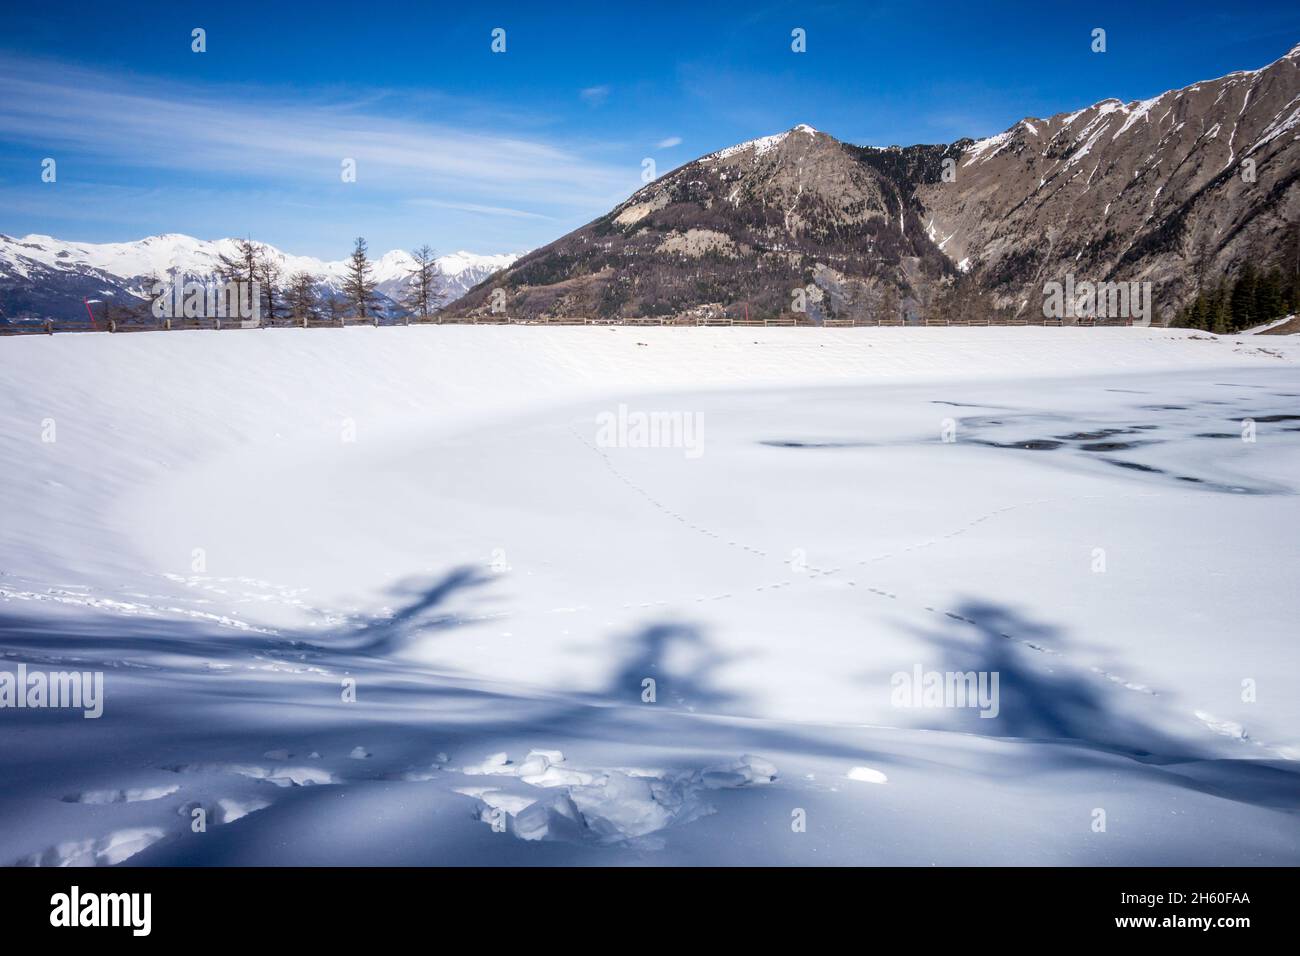 Mountain landscape under snow in winter and frozen lake Stock Photo